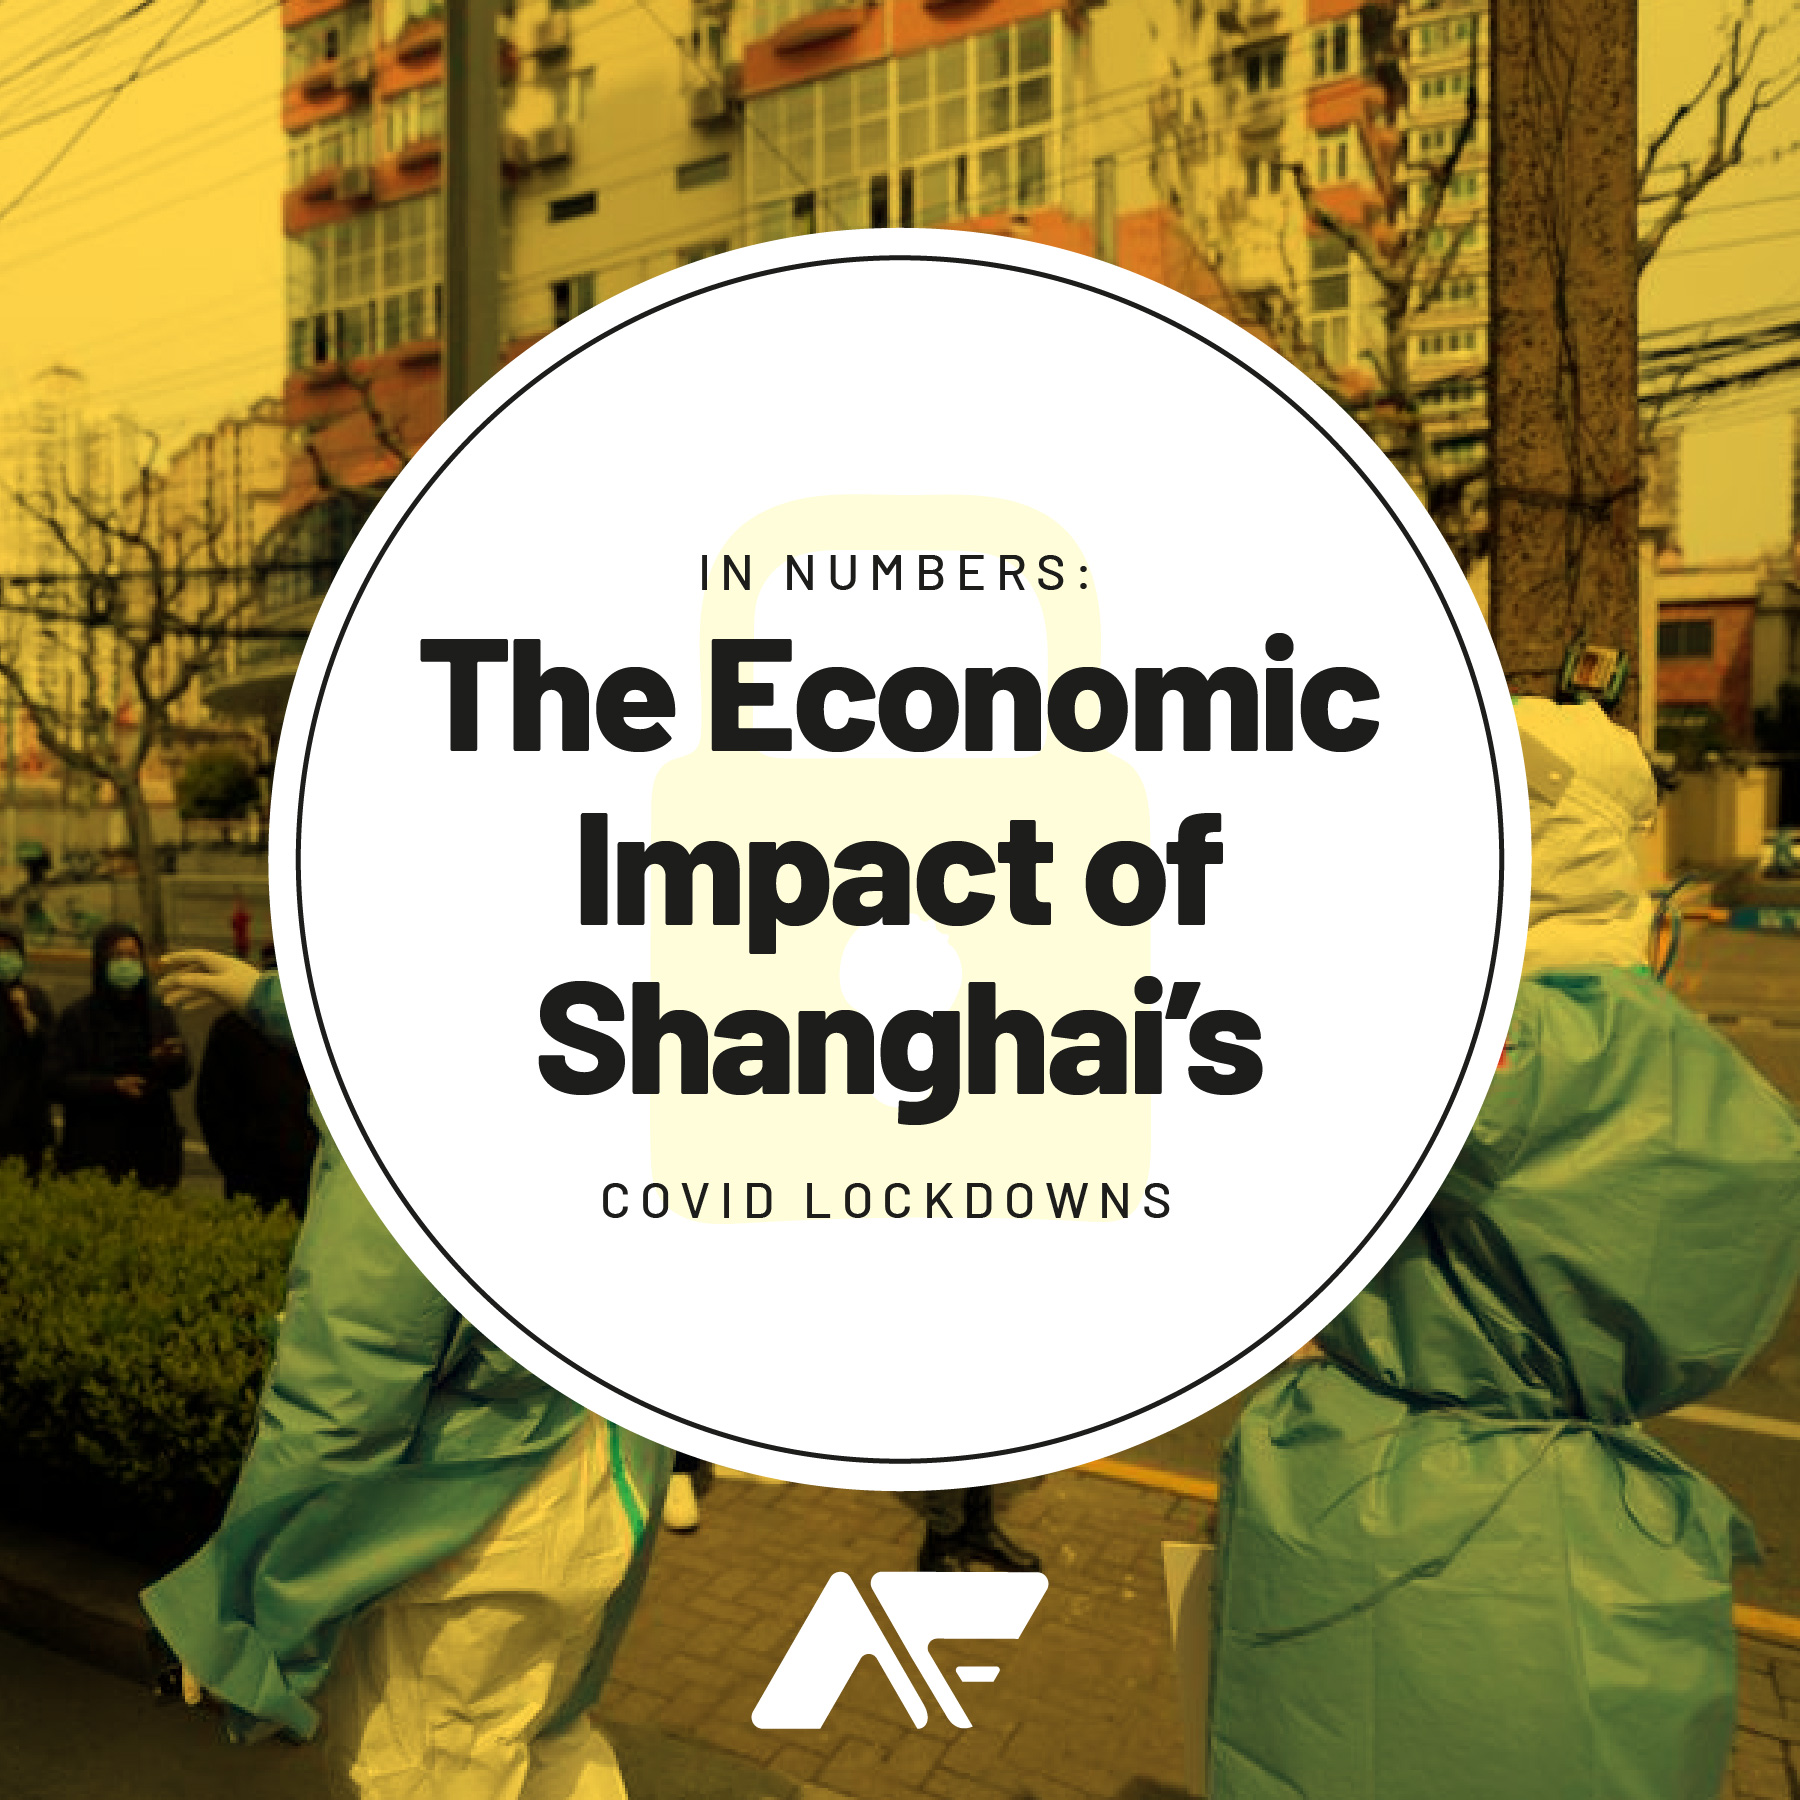 In Numbers: The Economic Impact of Shanghai’s Covid Lockdowns